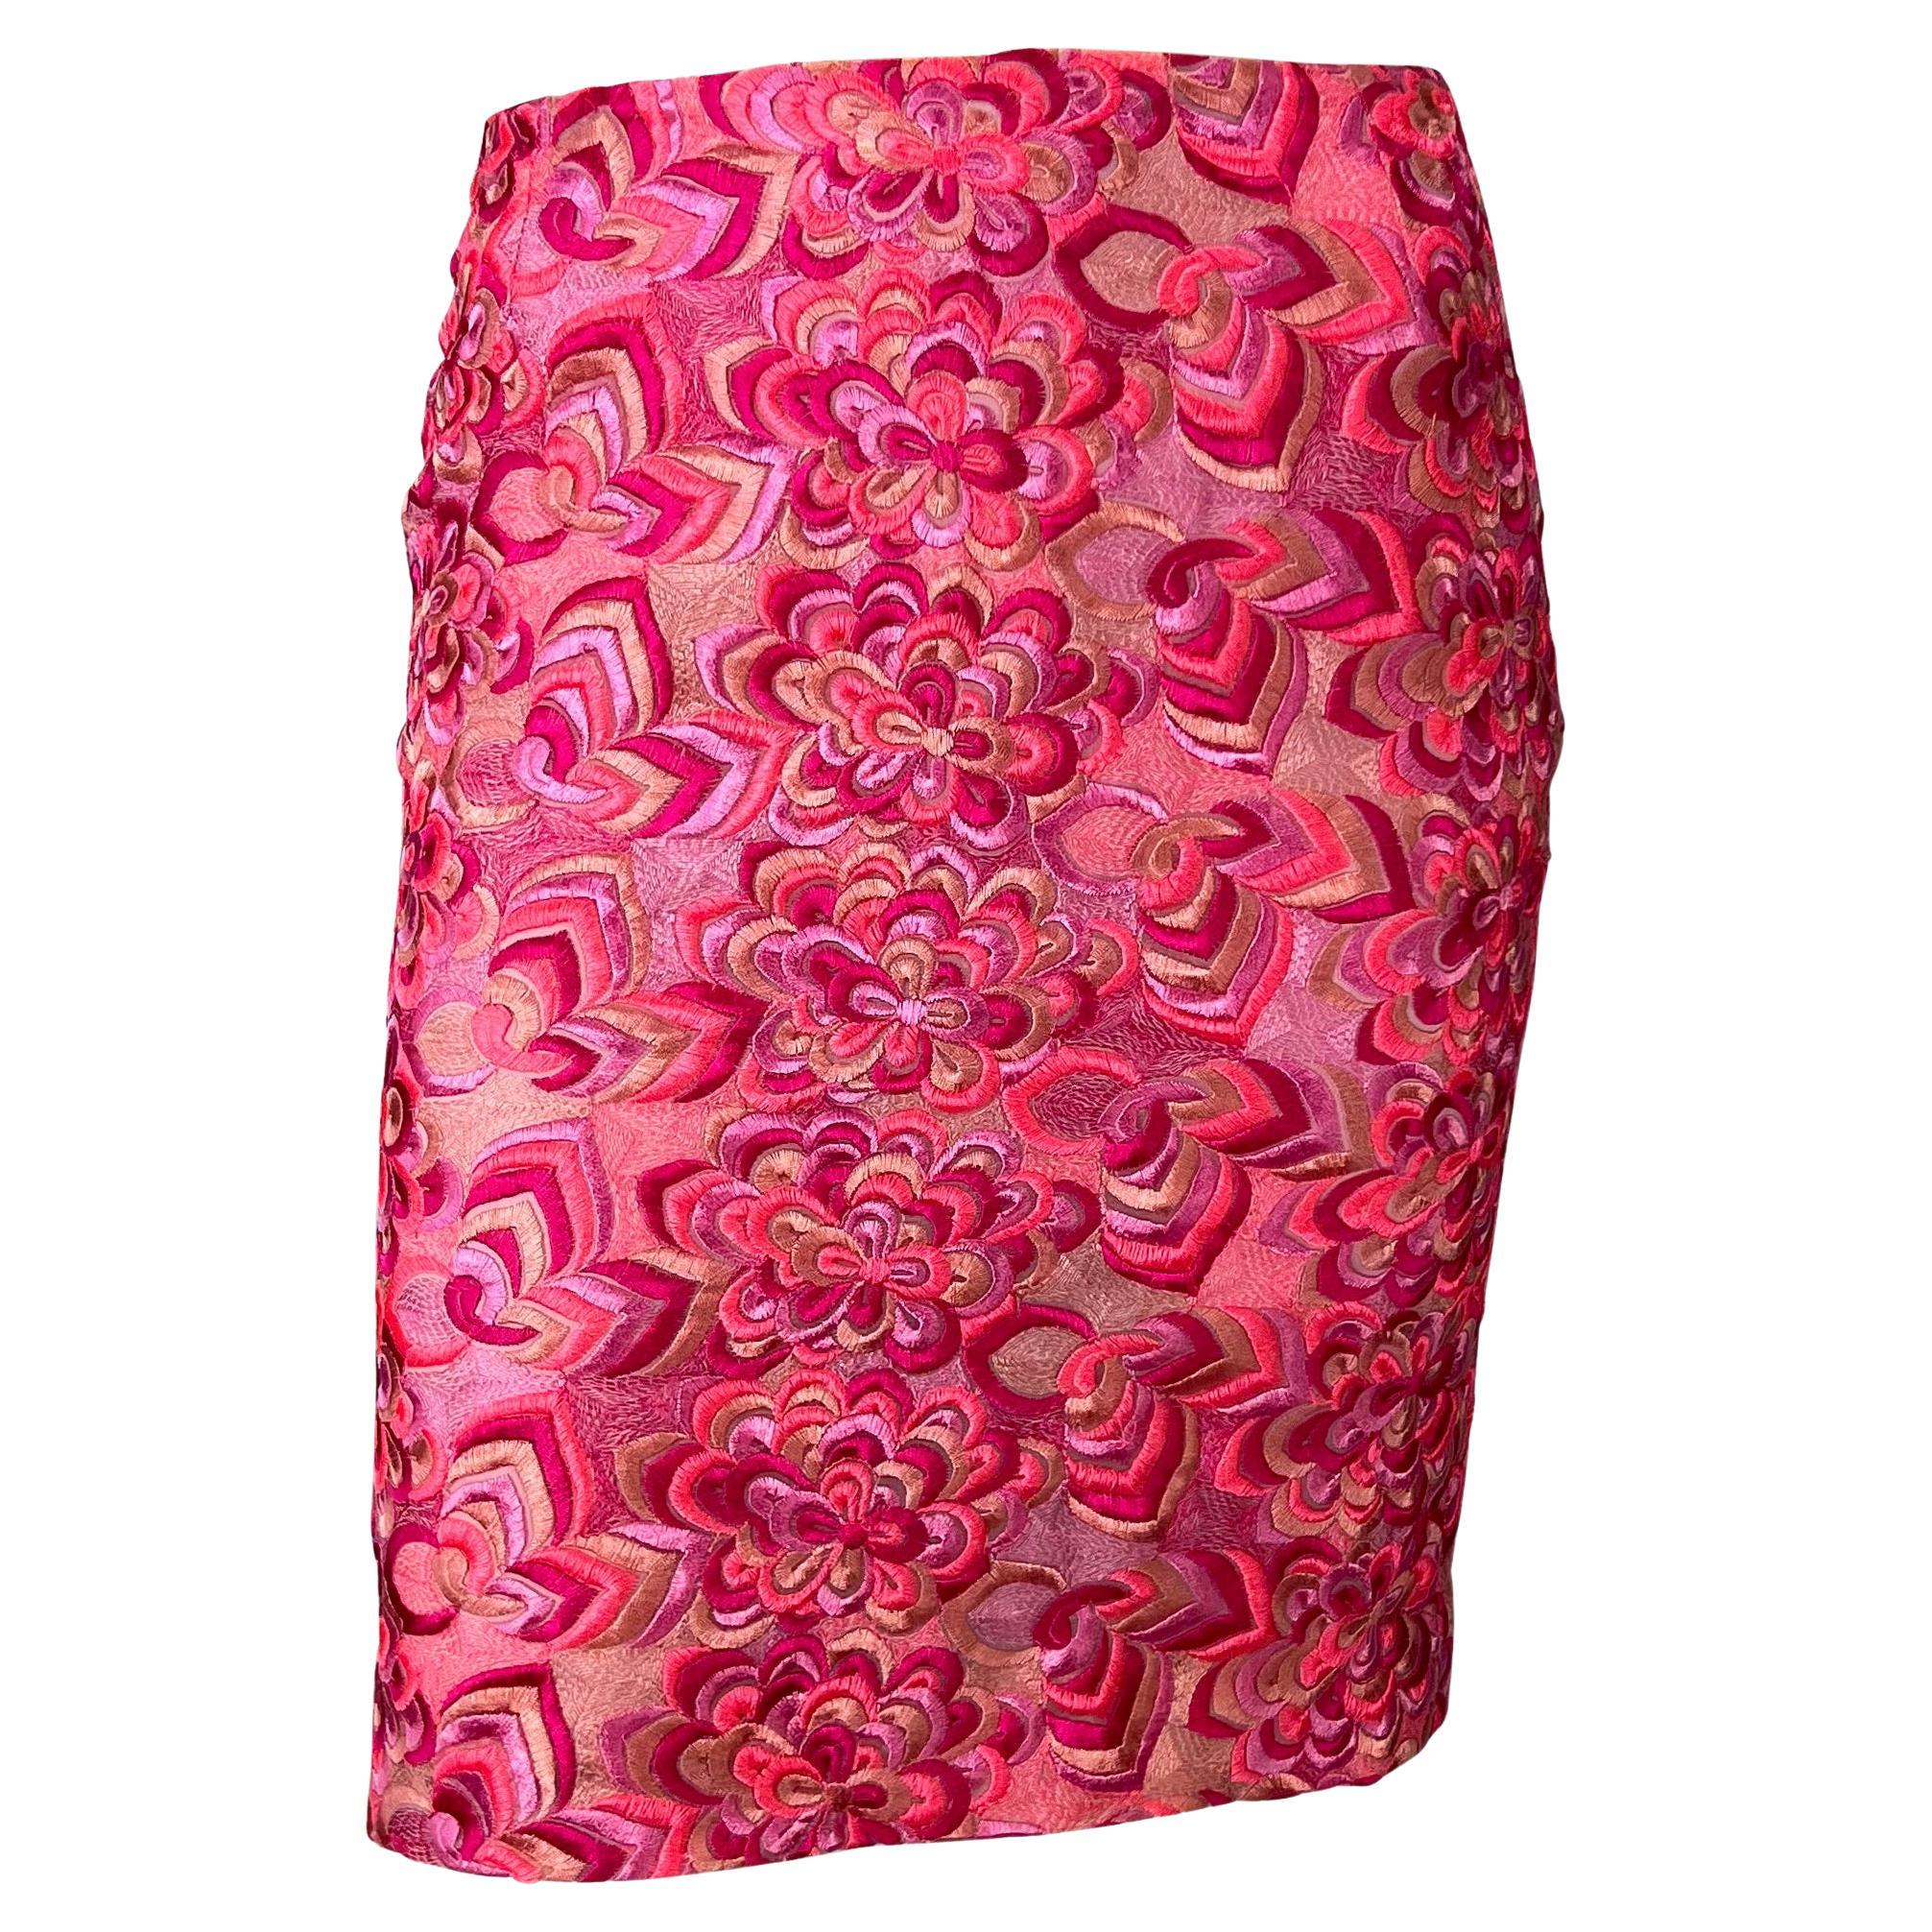 S/S 2000 Gianni Versace by Donatella Versace for Gianni Versace for Gianni Versace for Gianni Versace for Gianni Versace by Donatella Neon Pink Floral Embroidered Skirt en vente